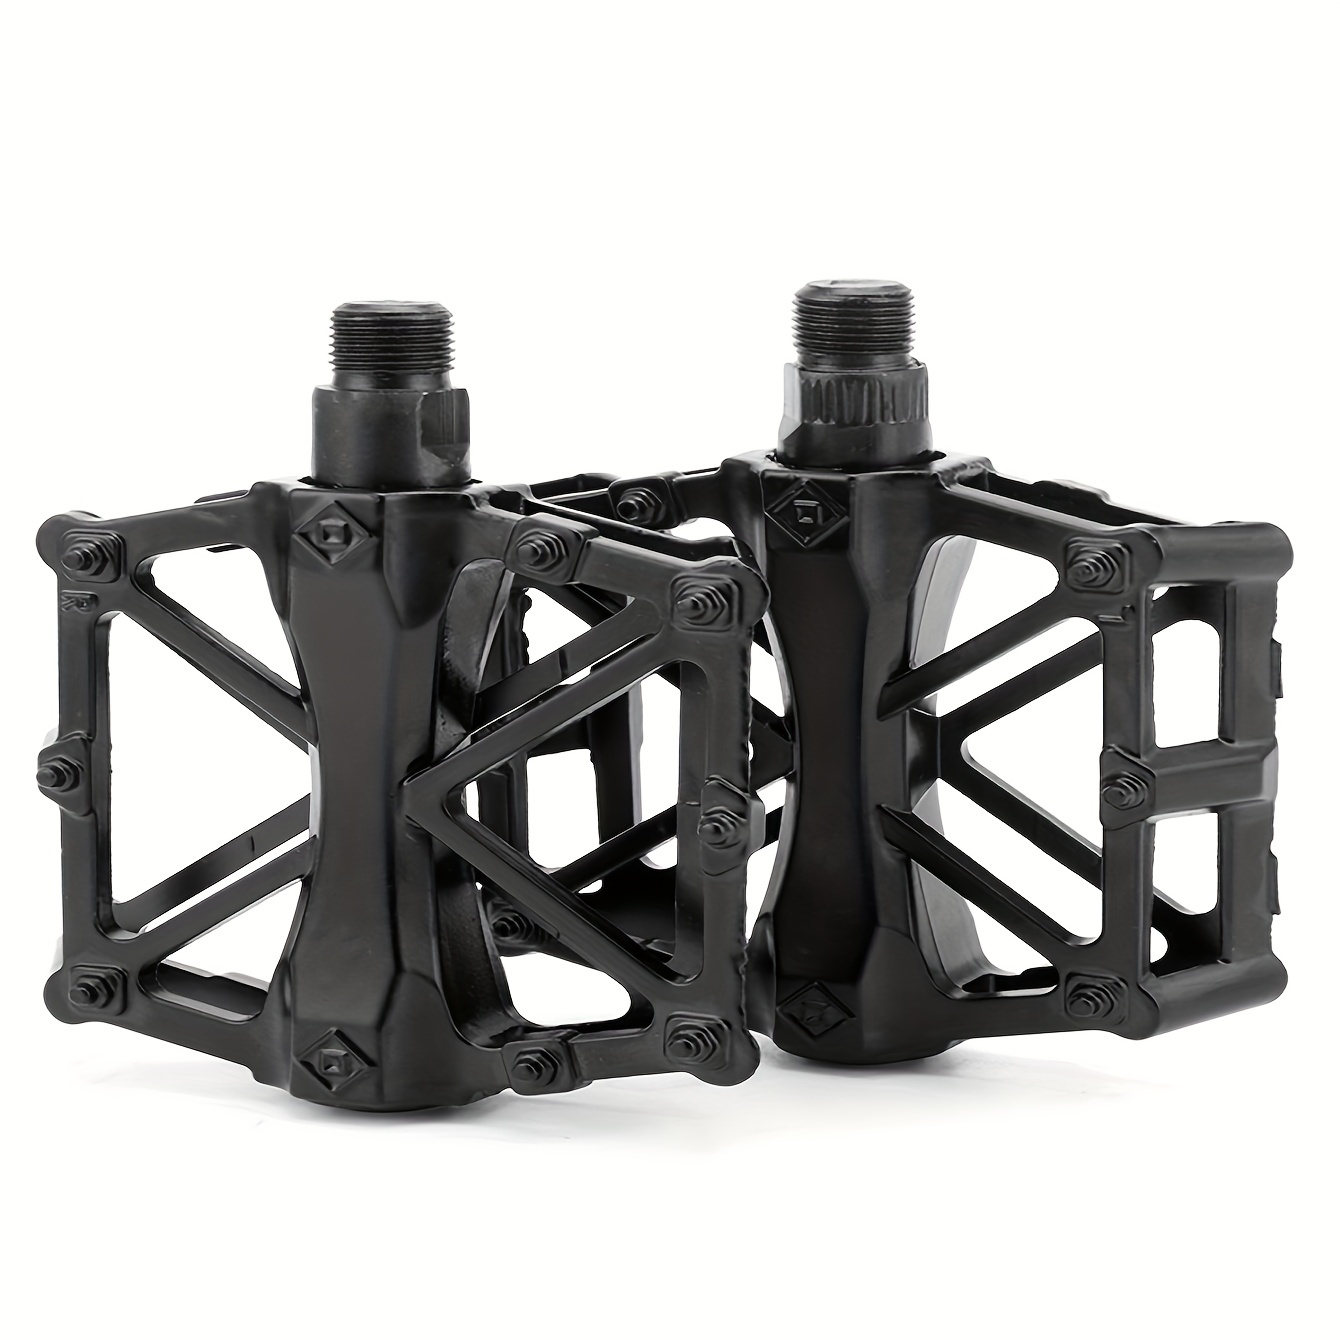 1pair Durable X-Shaped Bearing Mountain Bike Pedals for Enhanced  Performance and Comfort - Ideal for Adult and Young Riders - Universal Fit  Bike